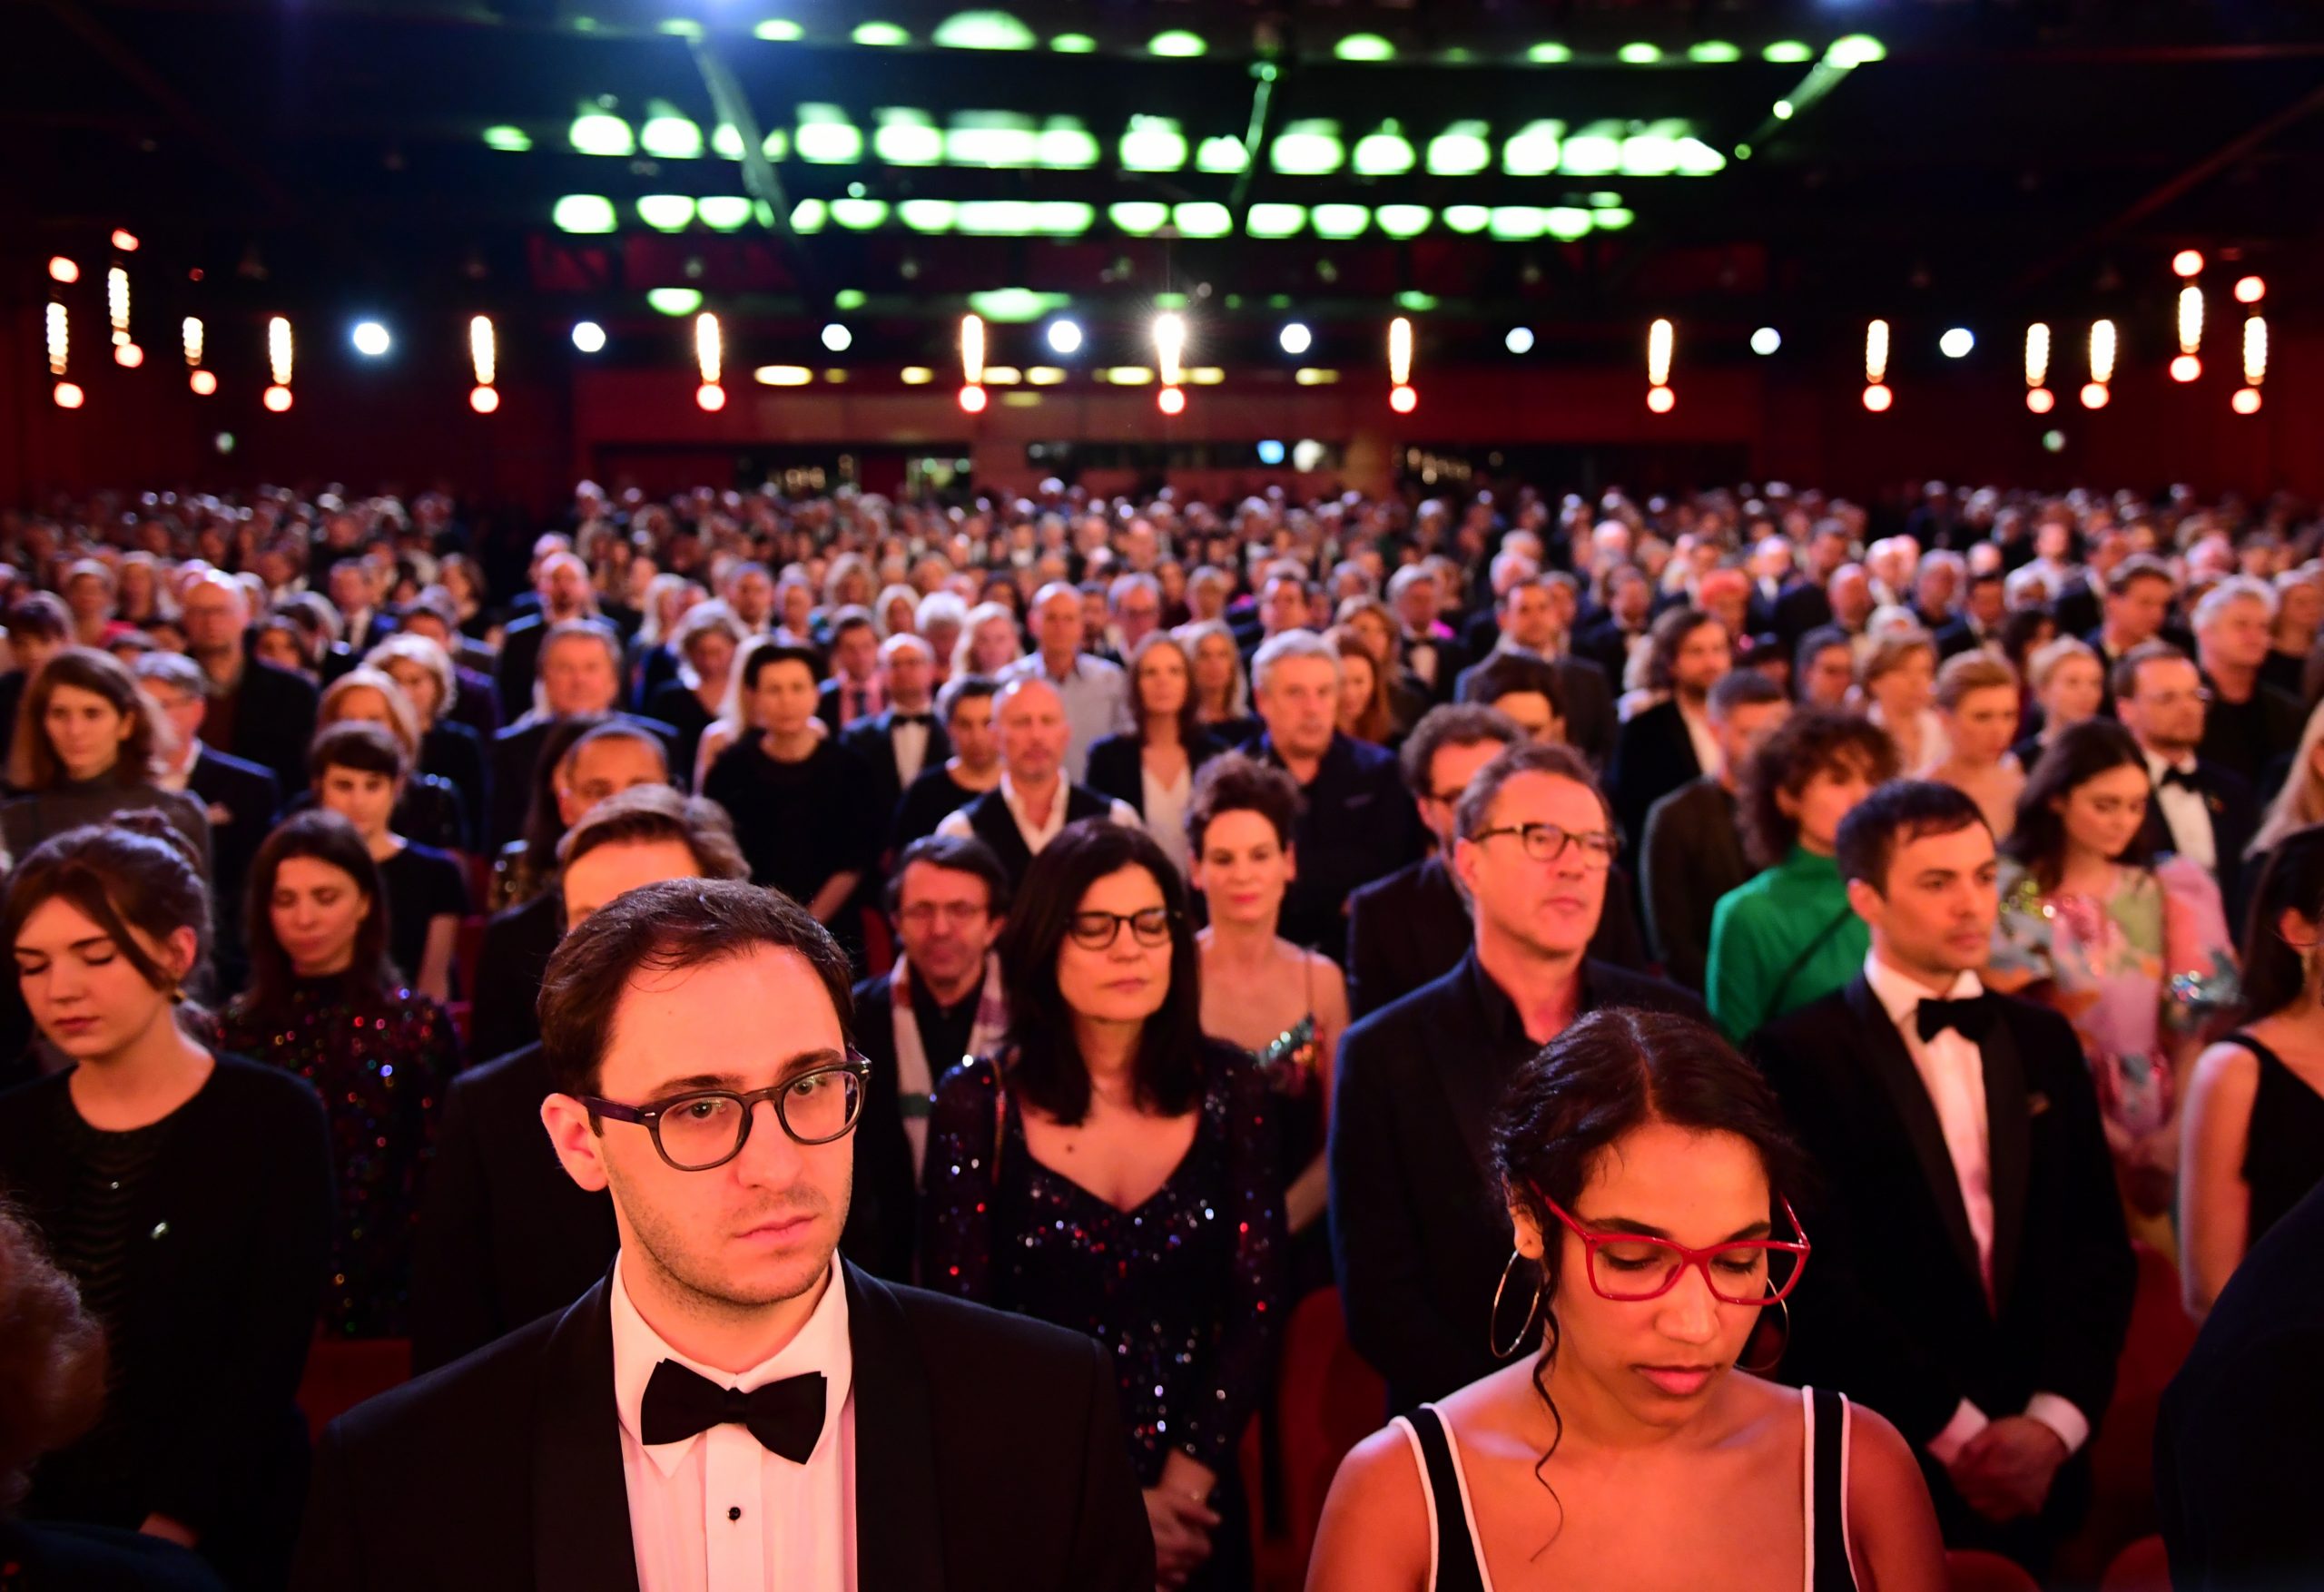 epa08232176 Members of the audience observe a minute of silence for the victims of the Hanau shootings during the Opening Ceremony of the 70th annual Berlin International Film Festival (Berlinale), in Berlin, Germany, 20 February 2020. The Berlinale runs from 20 February to 01 March 2020.  EPA/CLEMENS BILAN